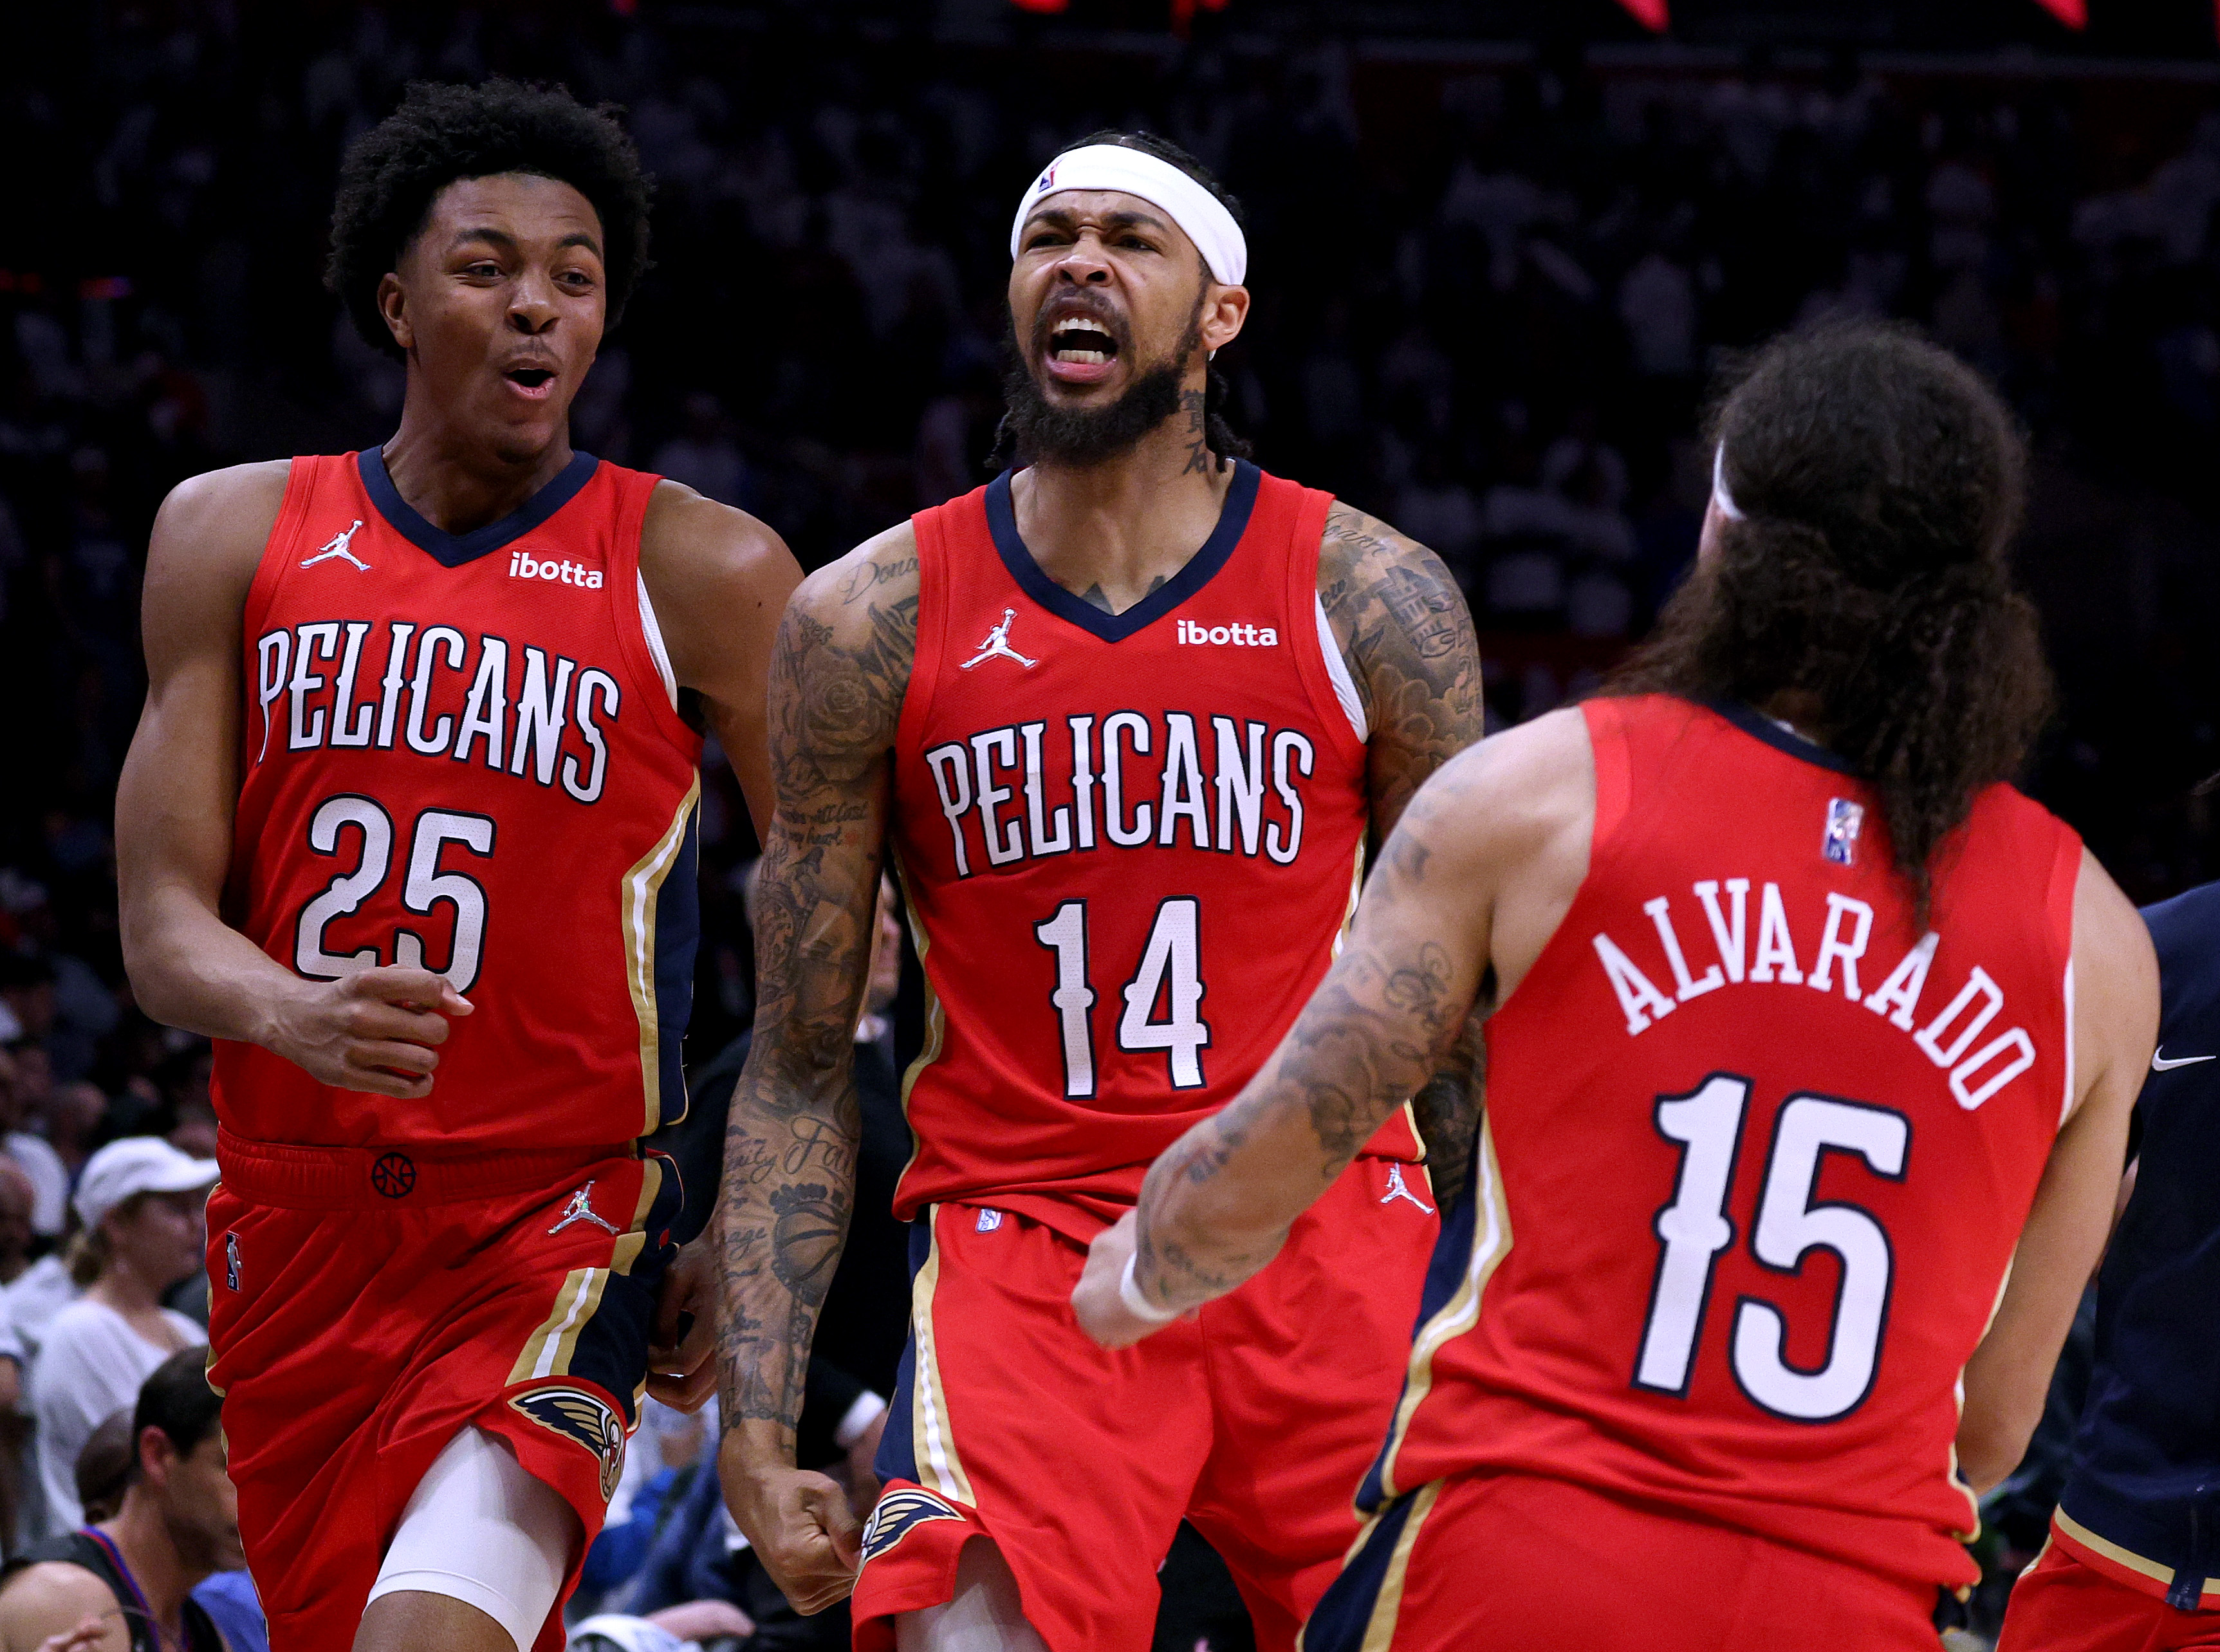 New Orleans Pelicans v Los Angeles Clippers - Play-In Tournament